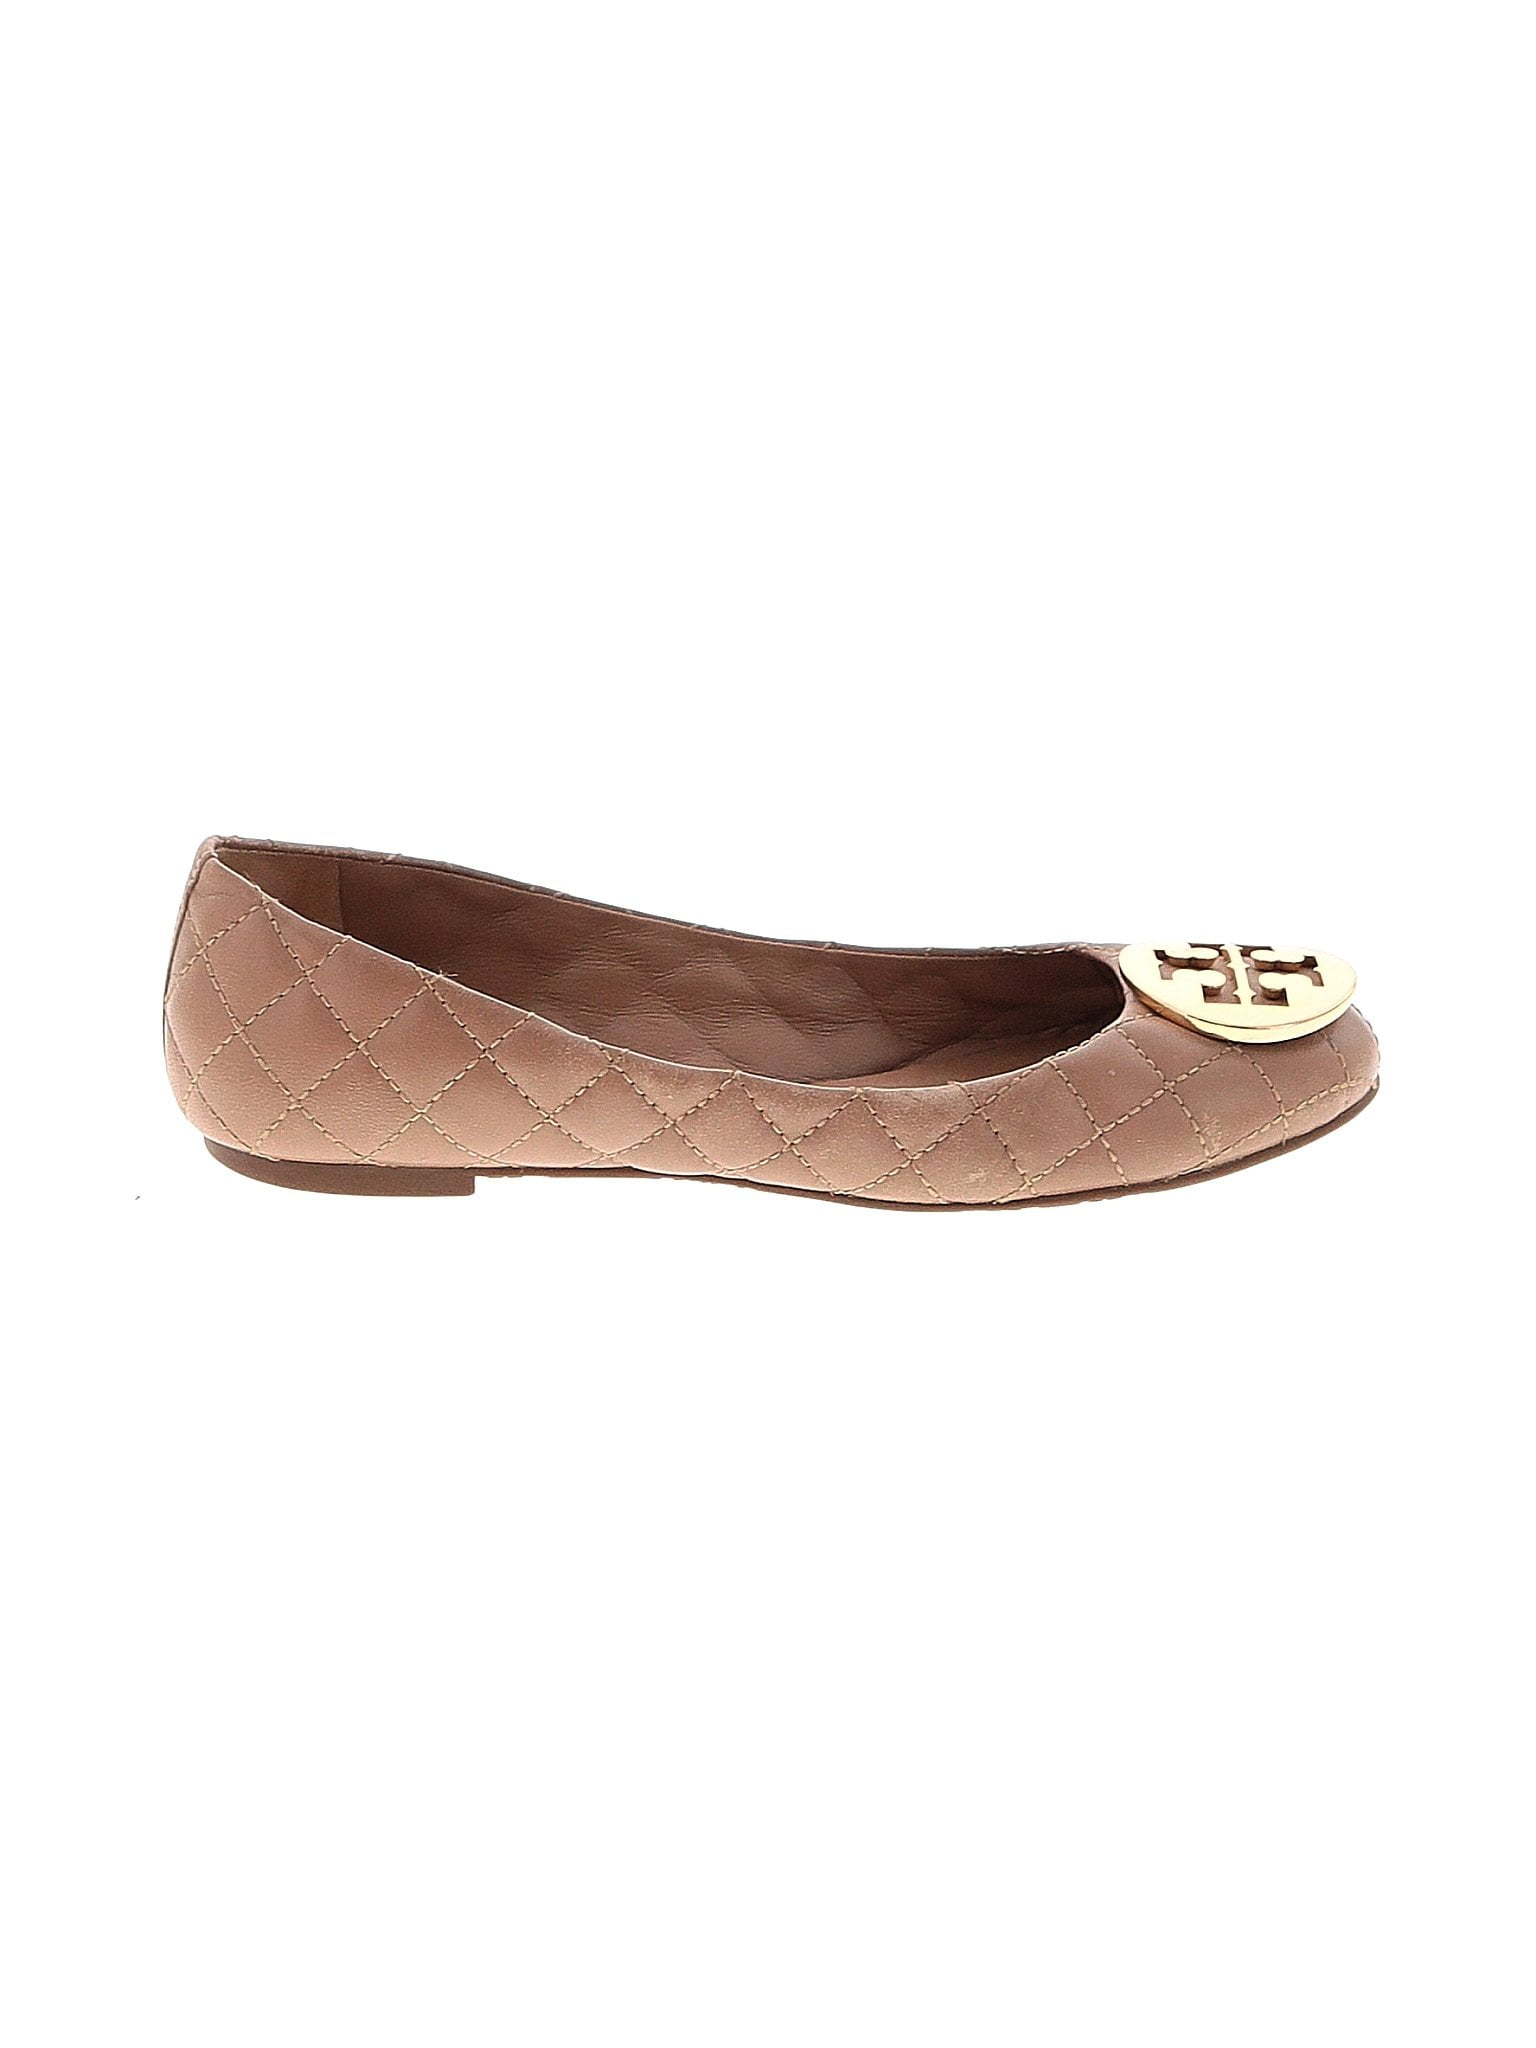 Pre-Owned Tory Burch Women's Size 7 Flats 